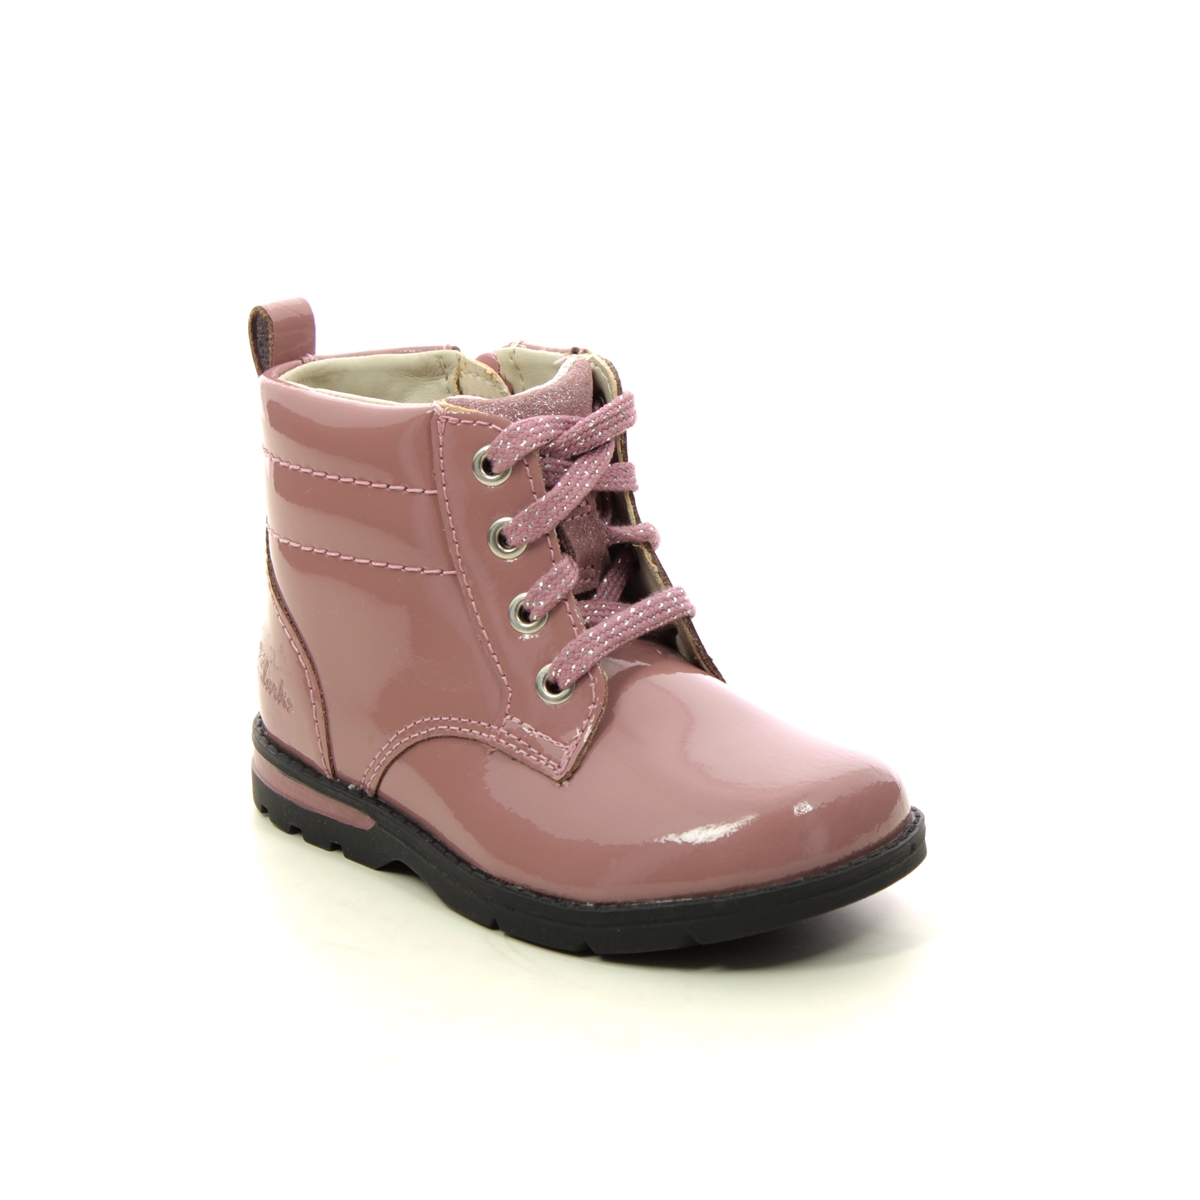 Clarks Dabi Lace T Pink Kids Toddler Girls Boots 6925-56F in a Plain Leather in Size 6